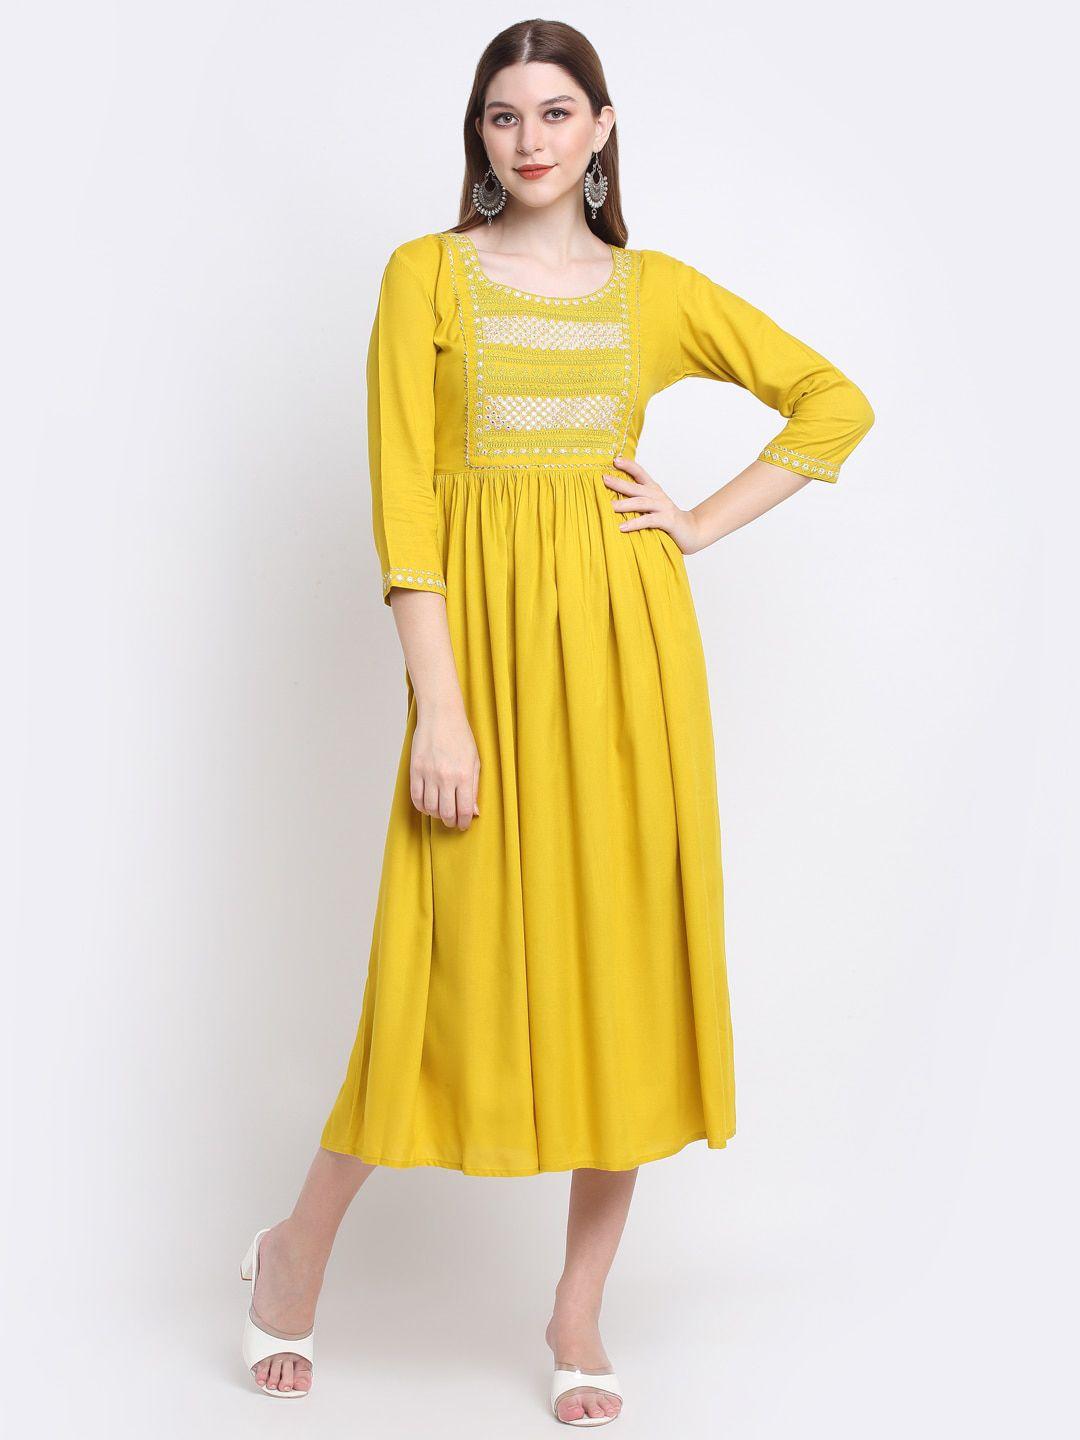 kalini mustard yellow & white floral embroidered a-line midi dress